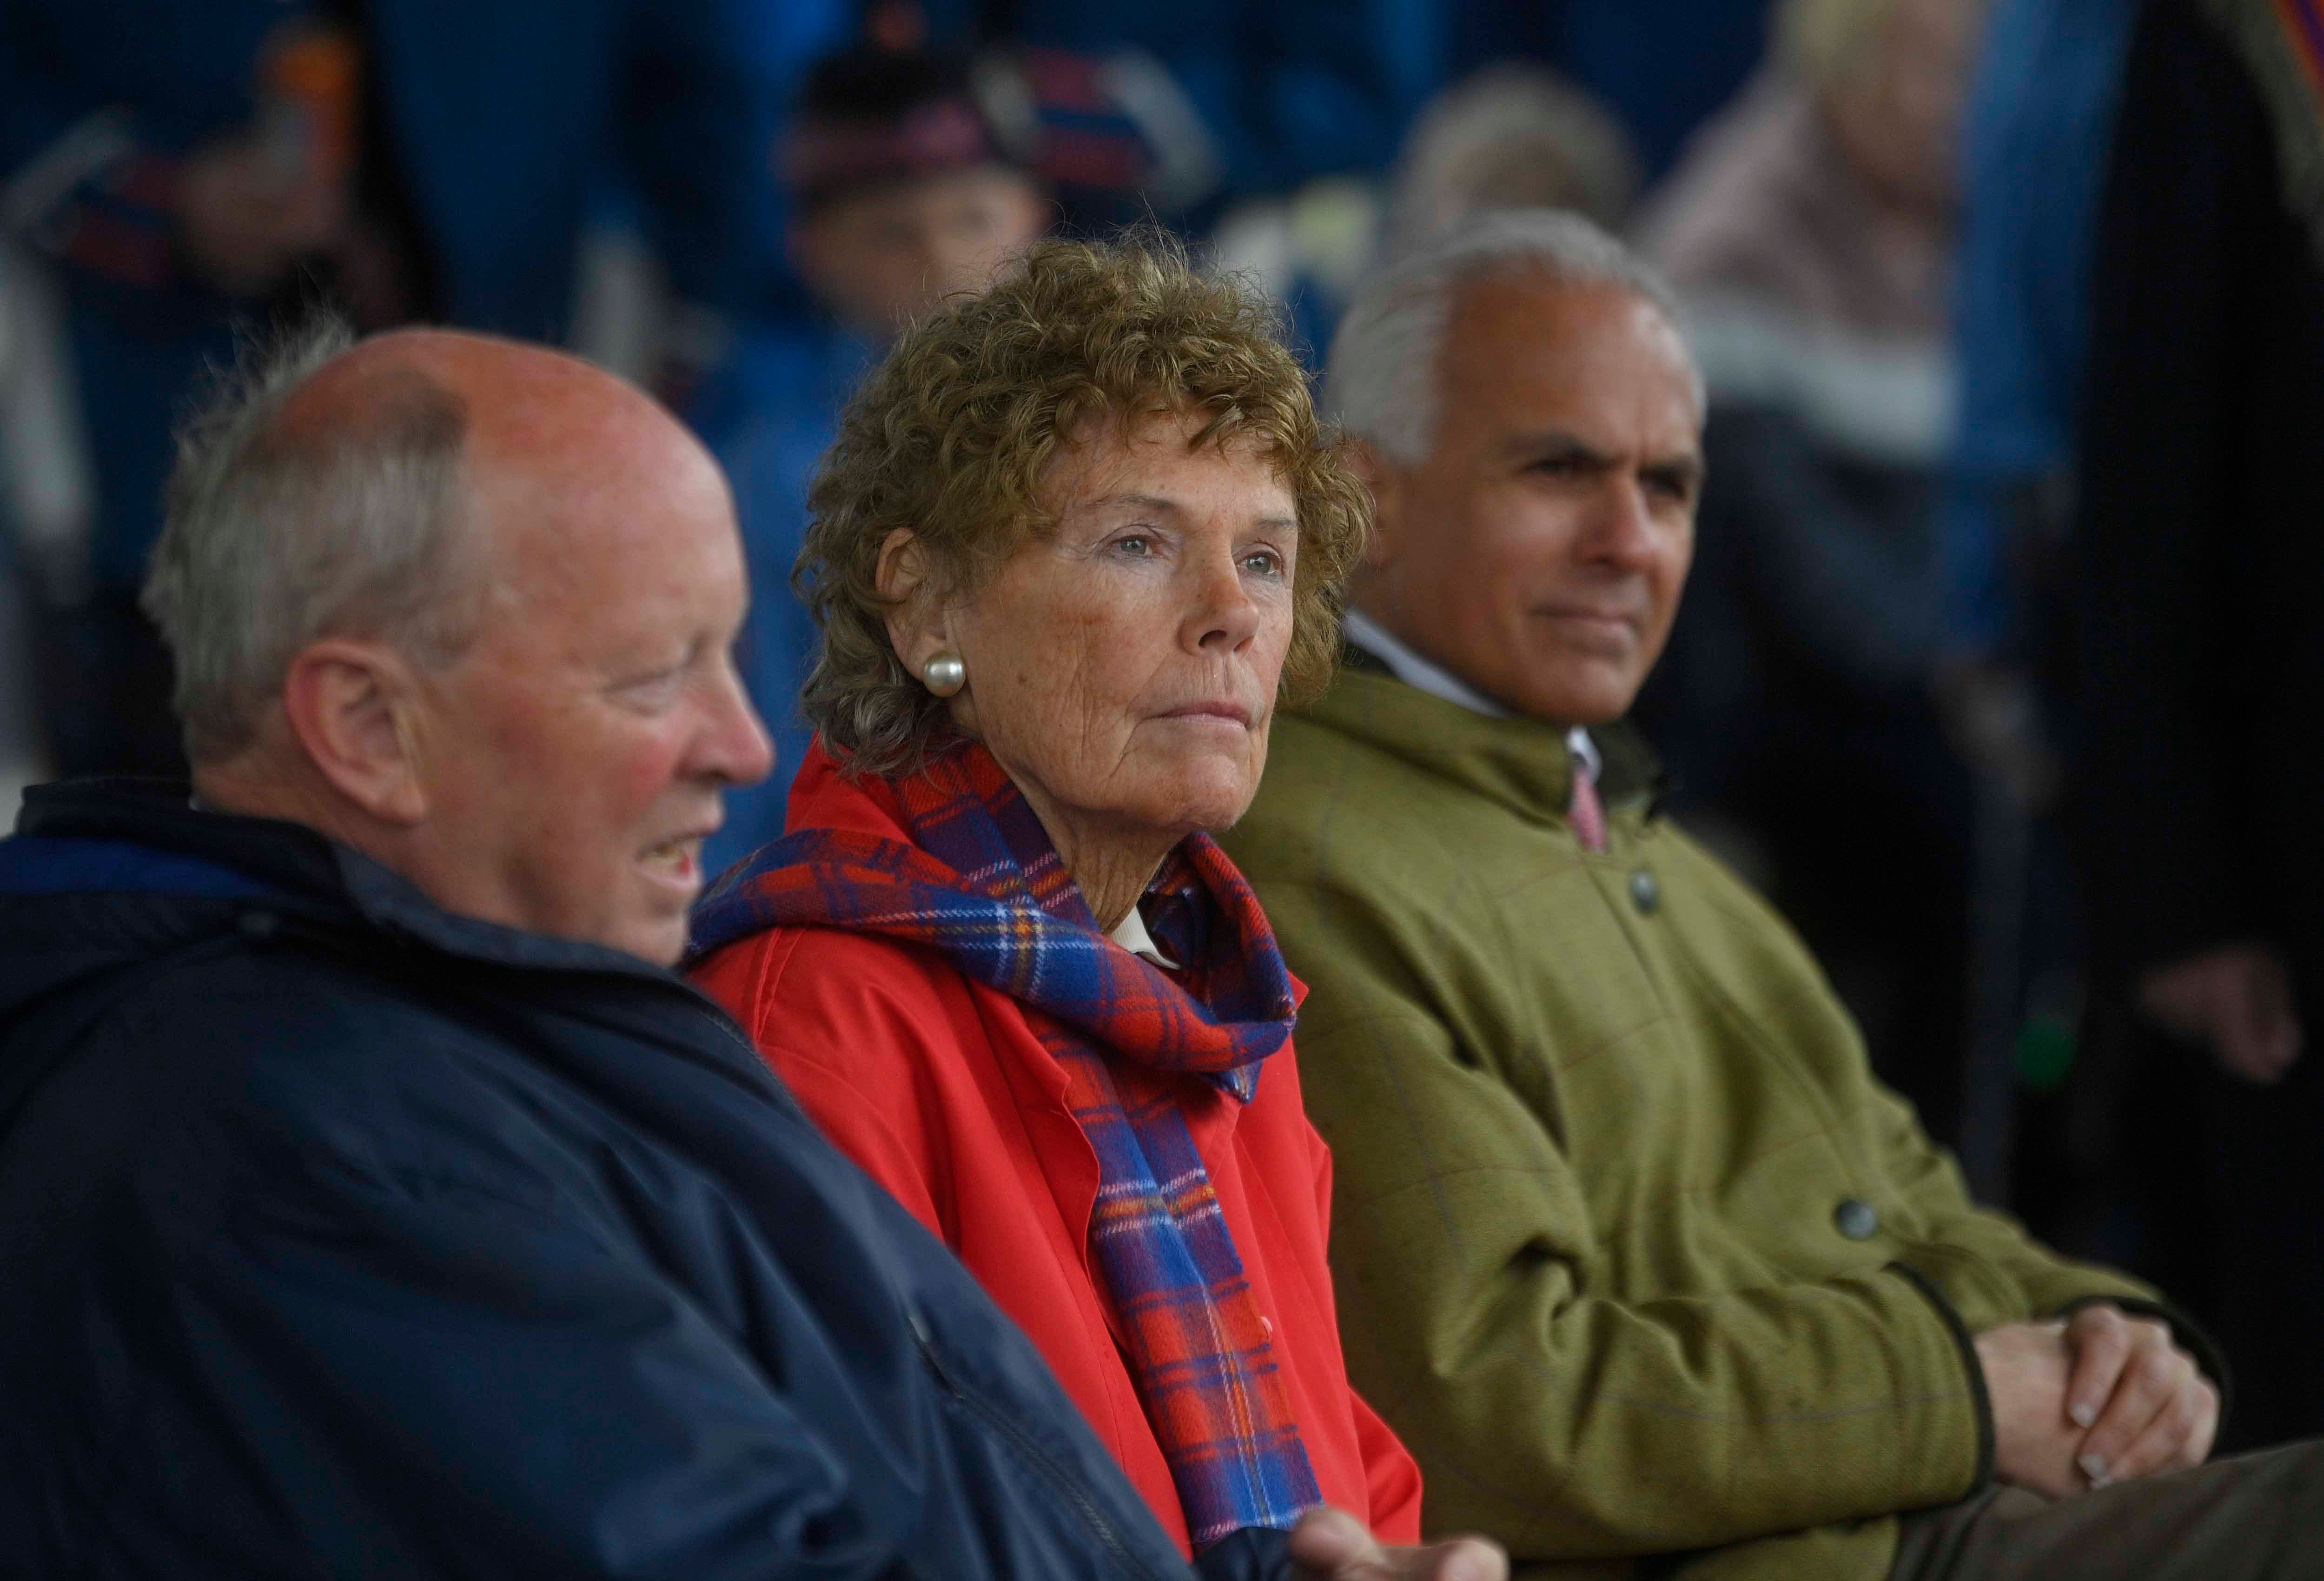 Politics Brexit Rally.Anti Protocal Rally in Ballymena, County Antrim. Jim Allister of The TUV , Baroness Kate Hoey and Ben Habib wait to speak during the Anti Protocal rally in Ballymena County Antrim. Saturday 30th April 2022. Picture Mark Marlow